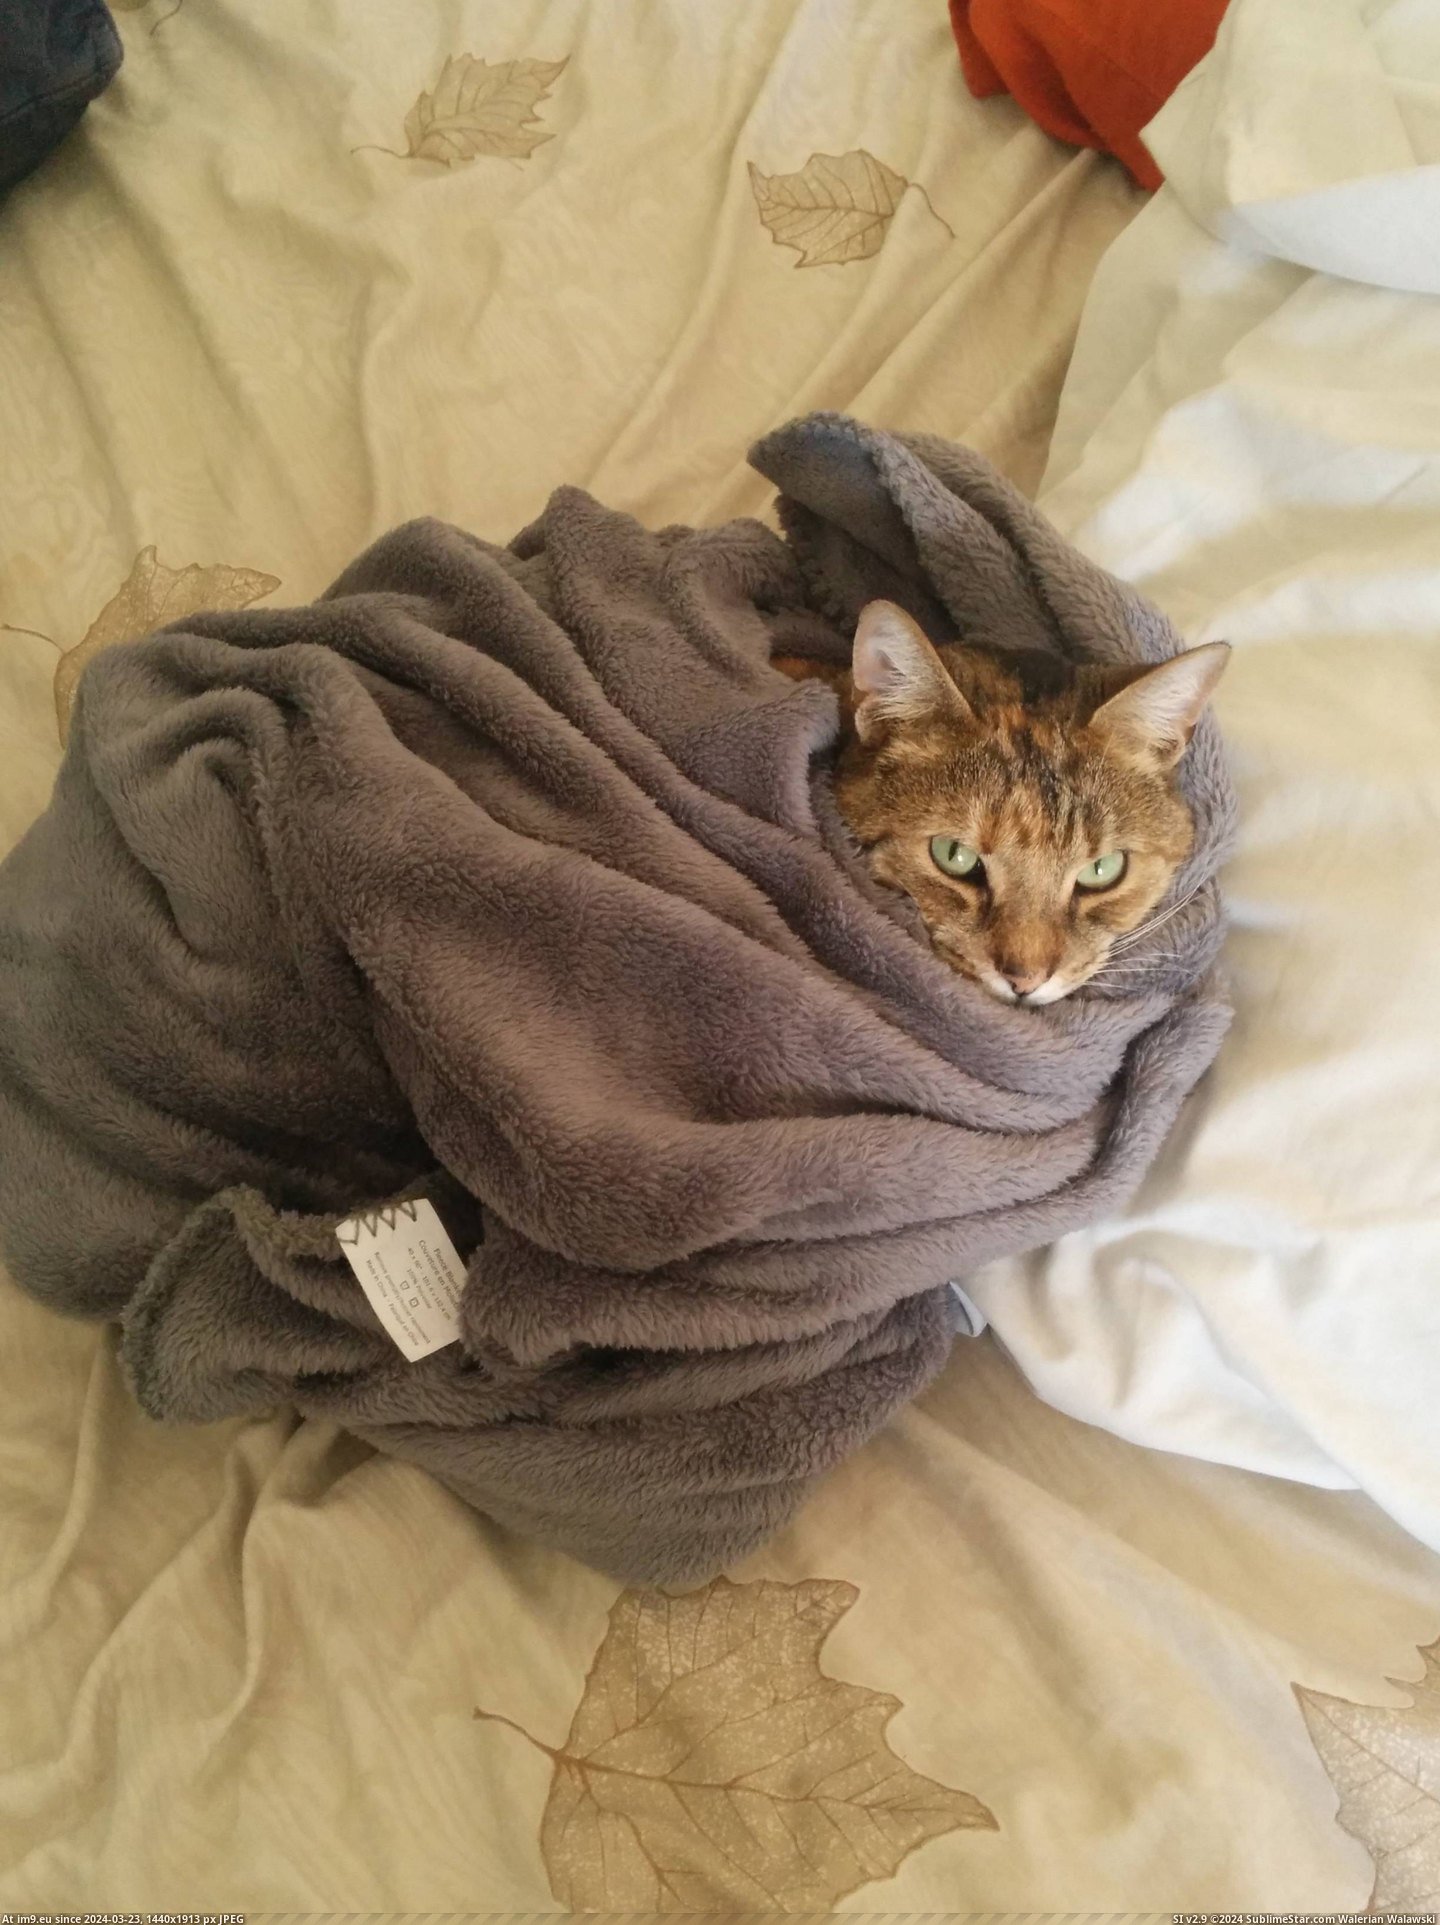 #Morning #Meows #Wrap [Aww] She meows every morning until I wrap her up Pic. (Bild von album My r/AWW favs))